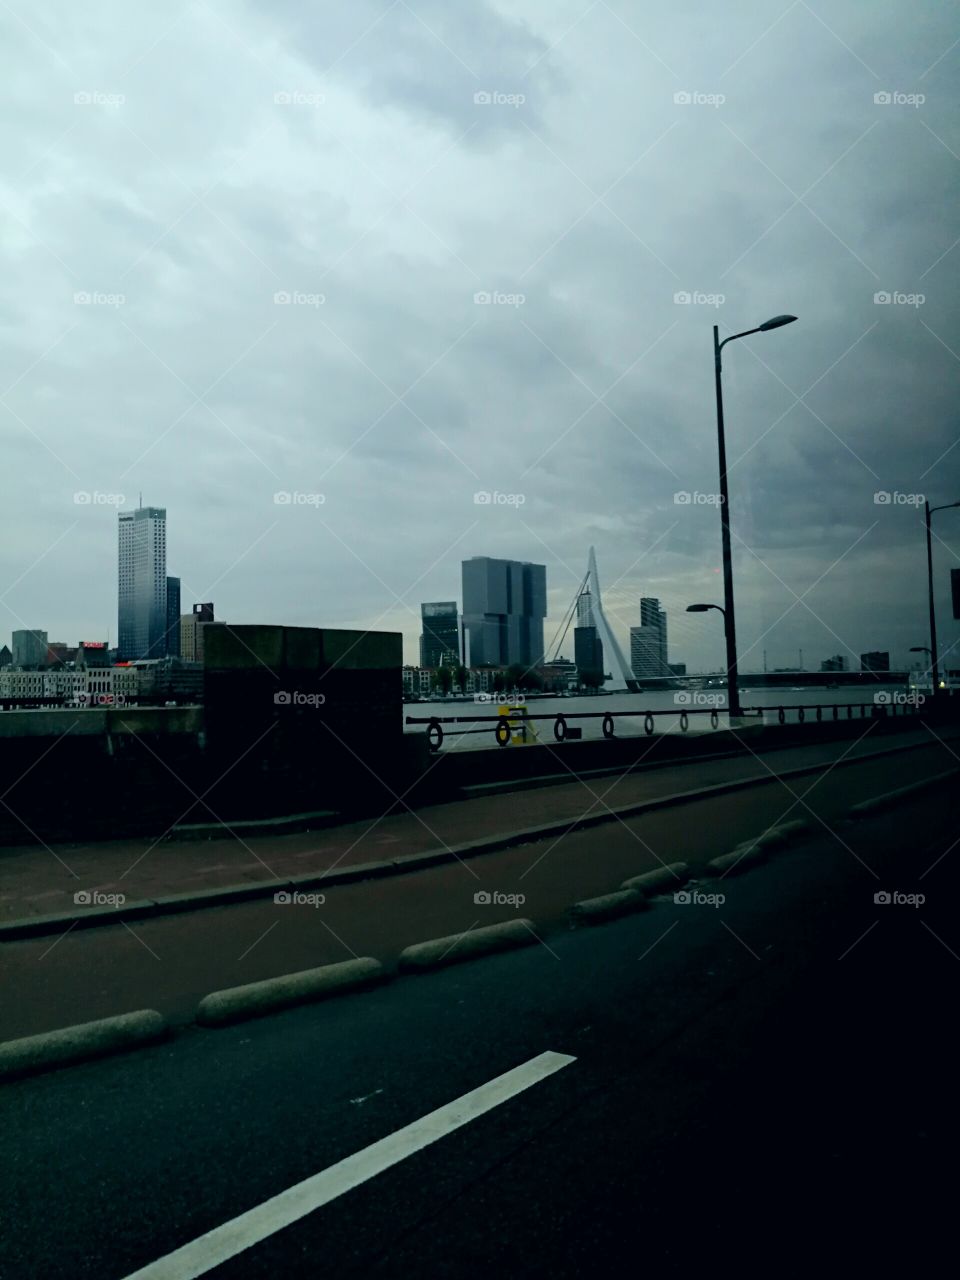 Rotterdam, the Netherlands. it's hard to catch a picture of this metropolis without a person in sight.